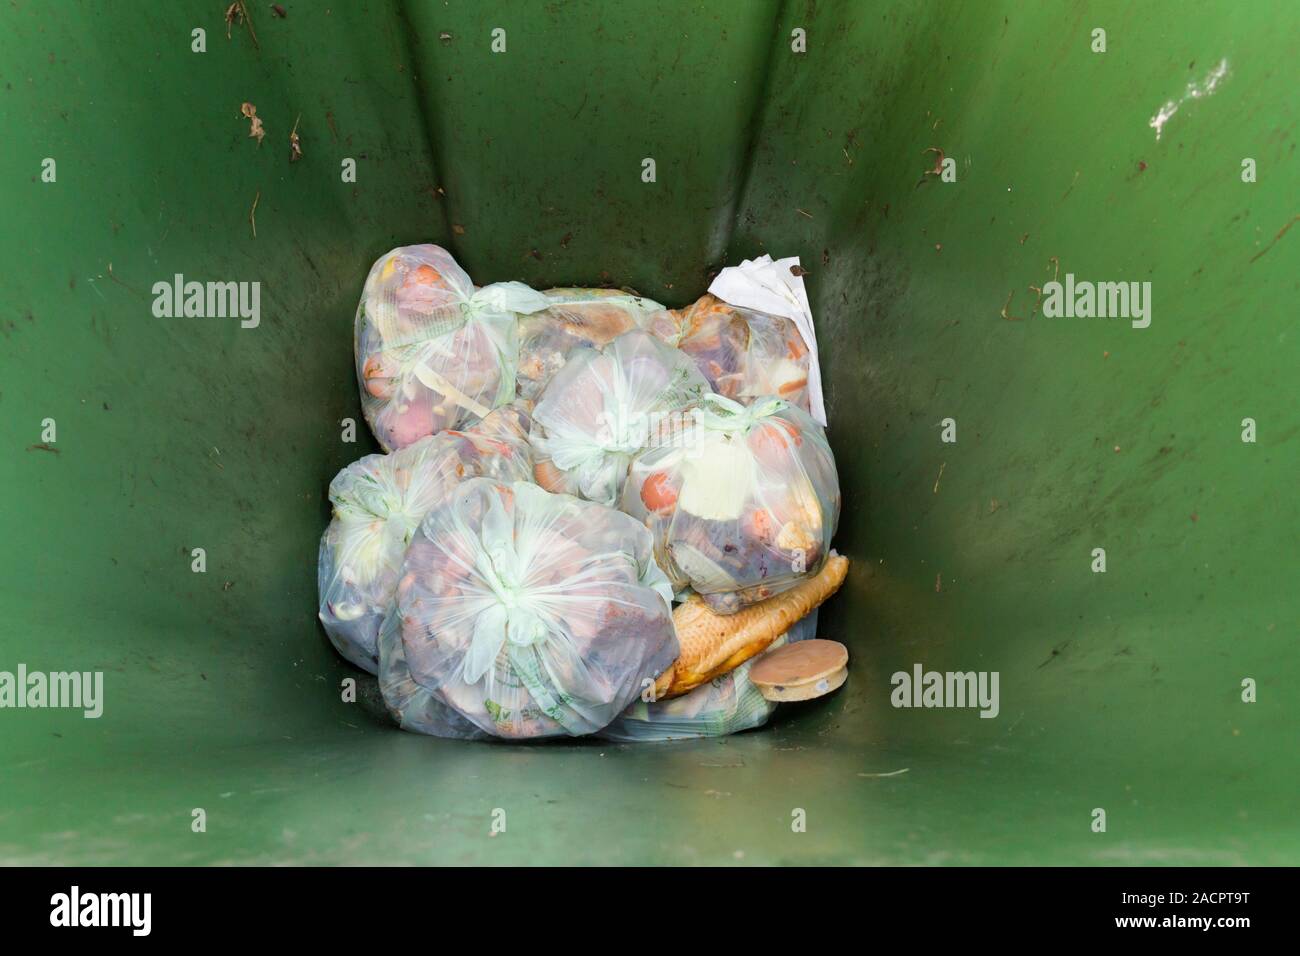 Recyclable, compostable food waste in compostable bags placed in the bottom of a green wheelie bin for kerbside collection. Stock Photo